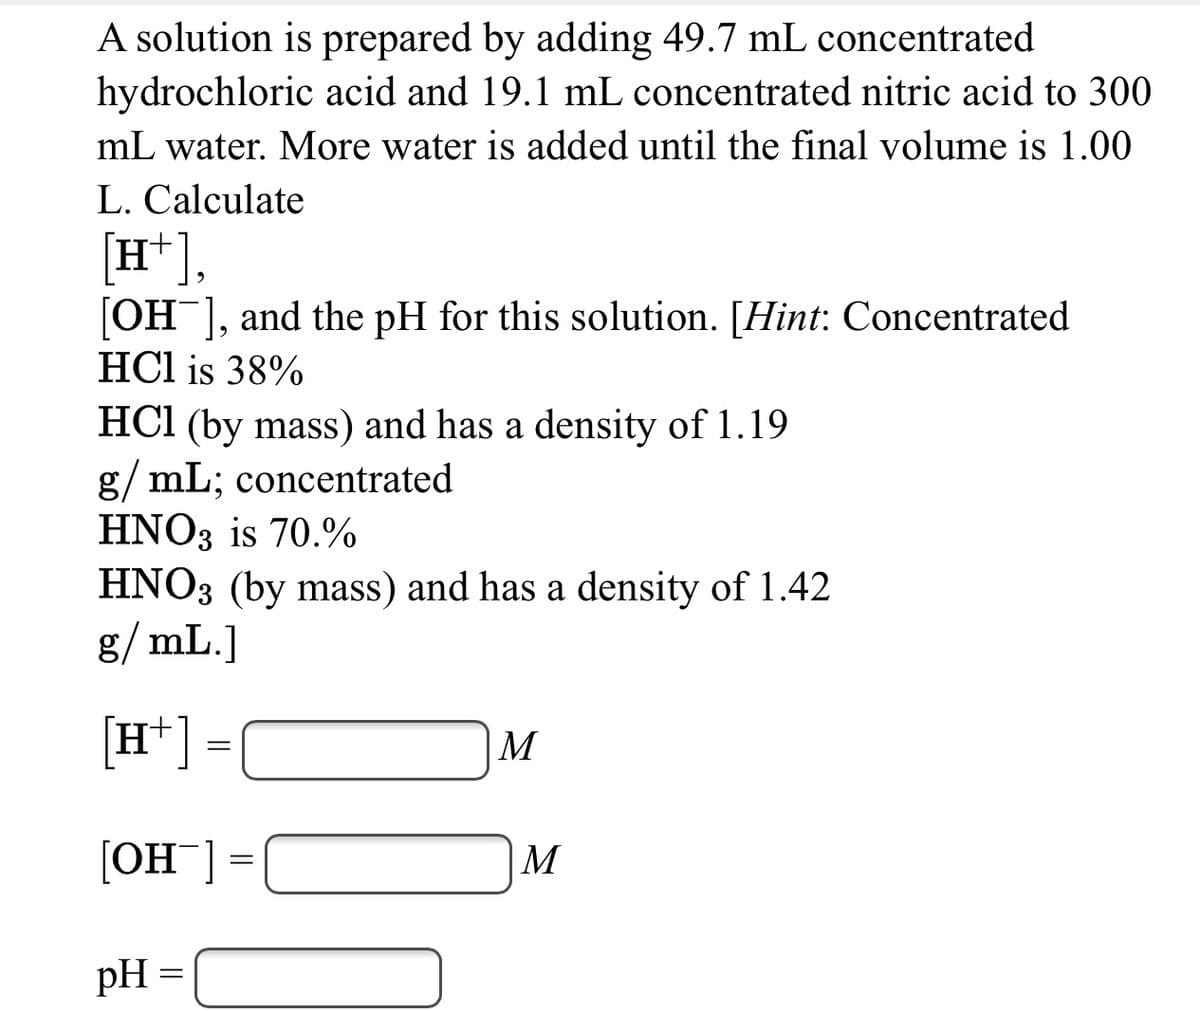 A solution is prepared by adding 49.7 mL concentrated
hydrochloric acid and 19.1 mL concentrated nitric acid to 300
mL water. More water is added until the final volume is 1.00
L. Calculate
[H*],
[OH ], and the pH for this solution. [Hint: Concentrated
HCl is 38%
HCI (by mass) and has a density of 1.19
g/ mL; concentrated
HNO3 is 70.%
HNO3 (by mass) and has a density of 1.42
g/ mL.]
[H*] =
M
[OH¯] =
|M
pH =
